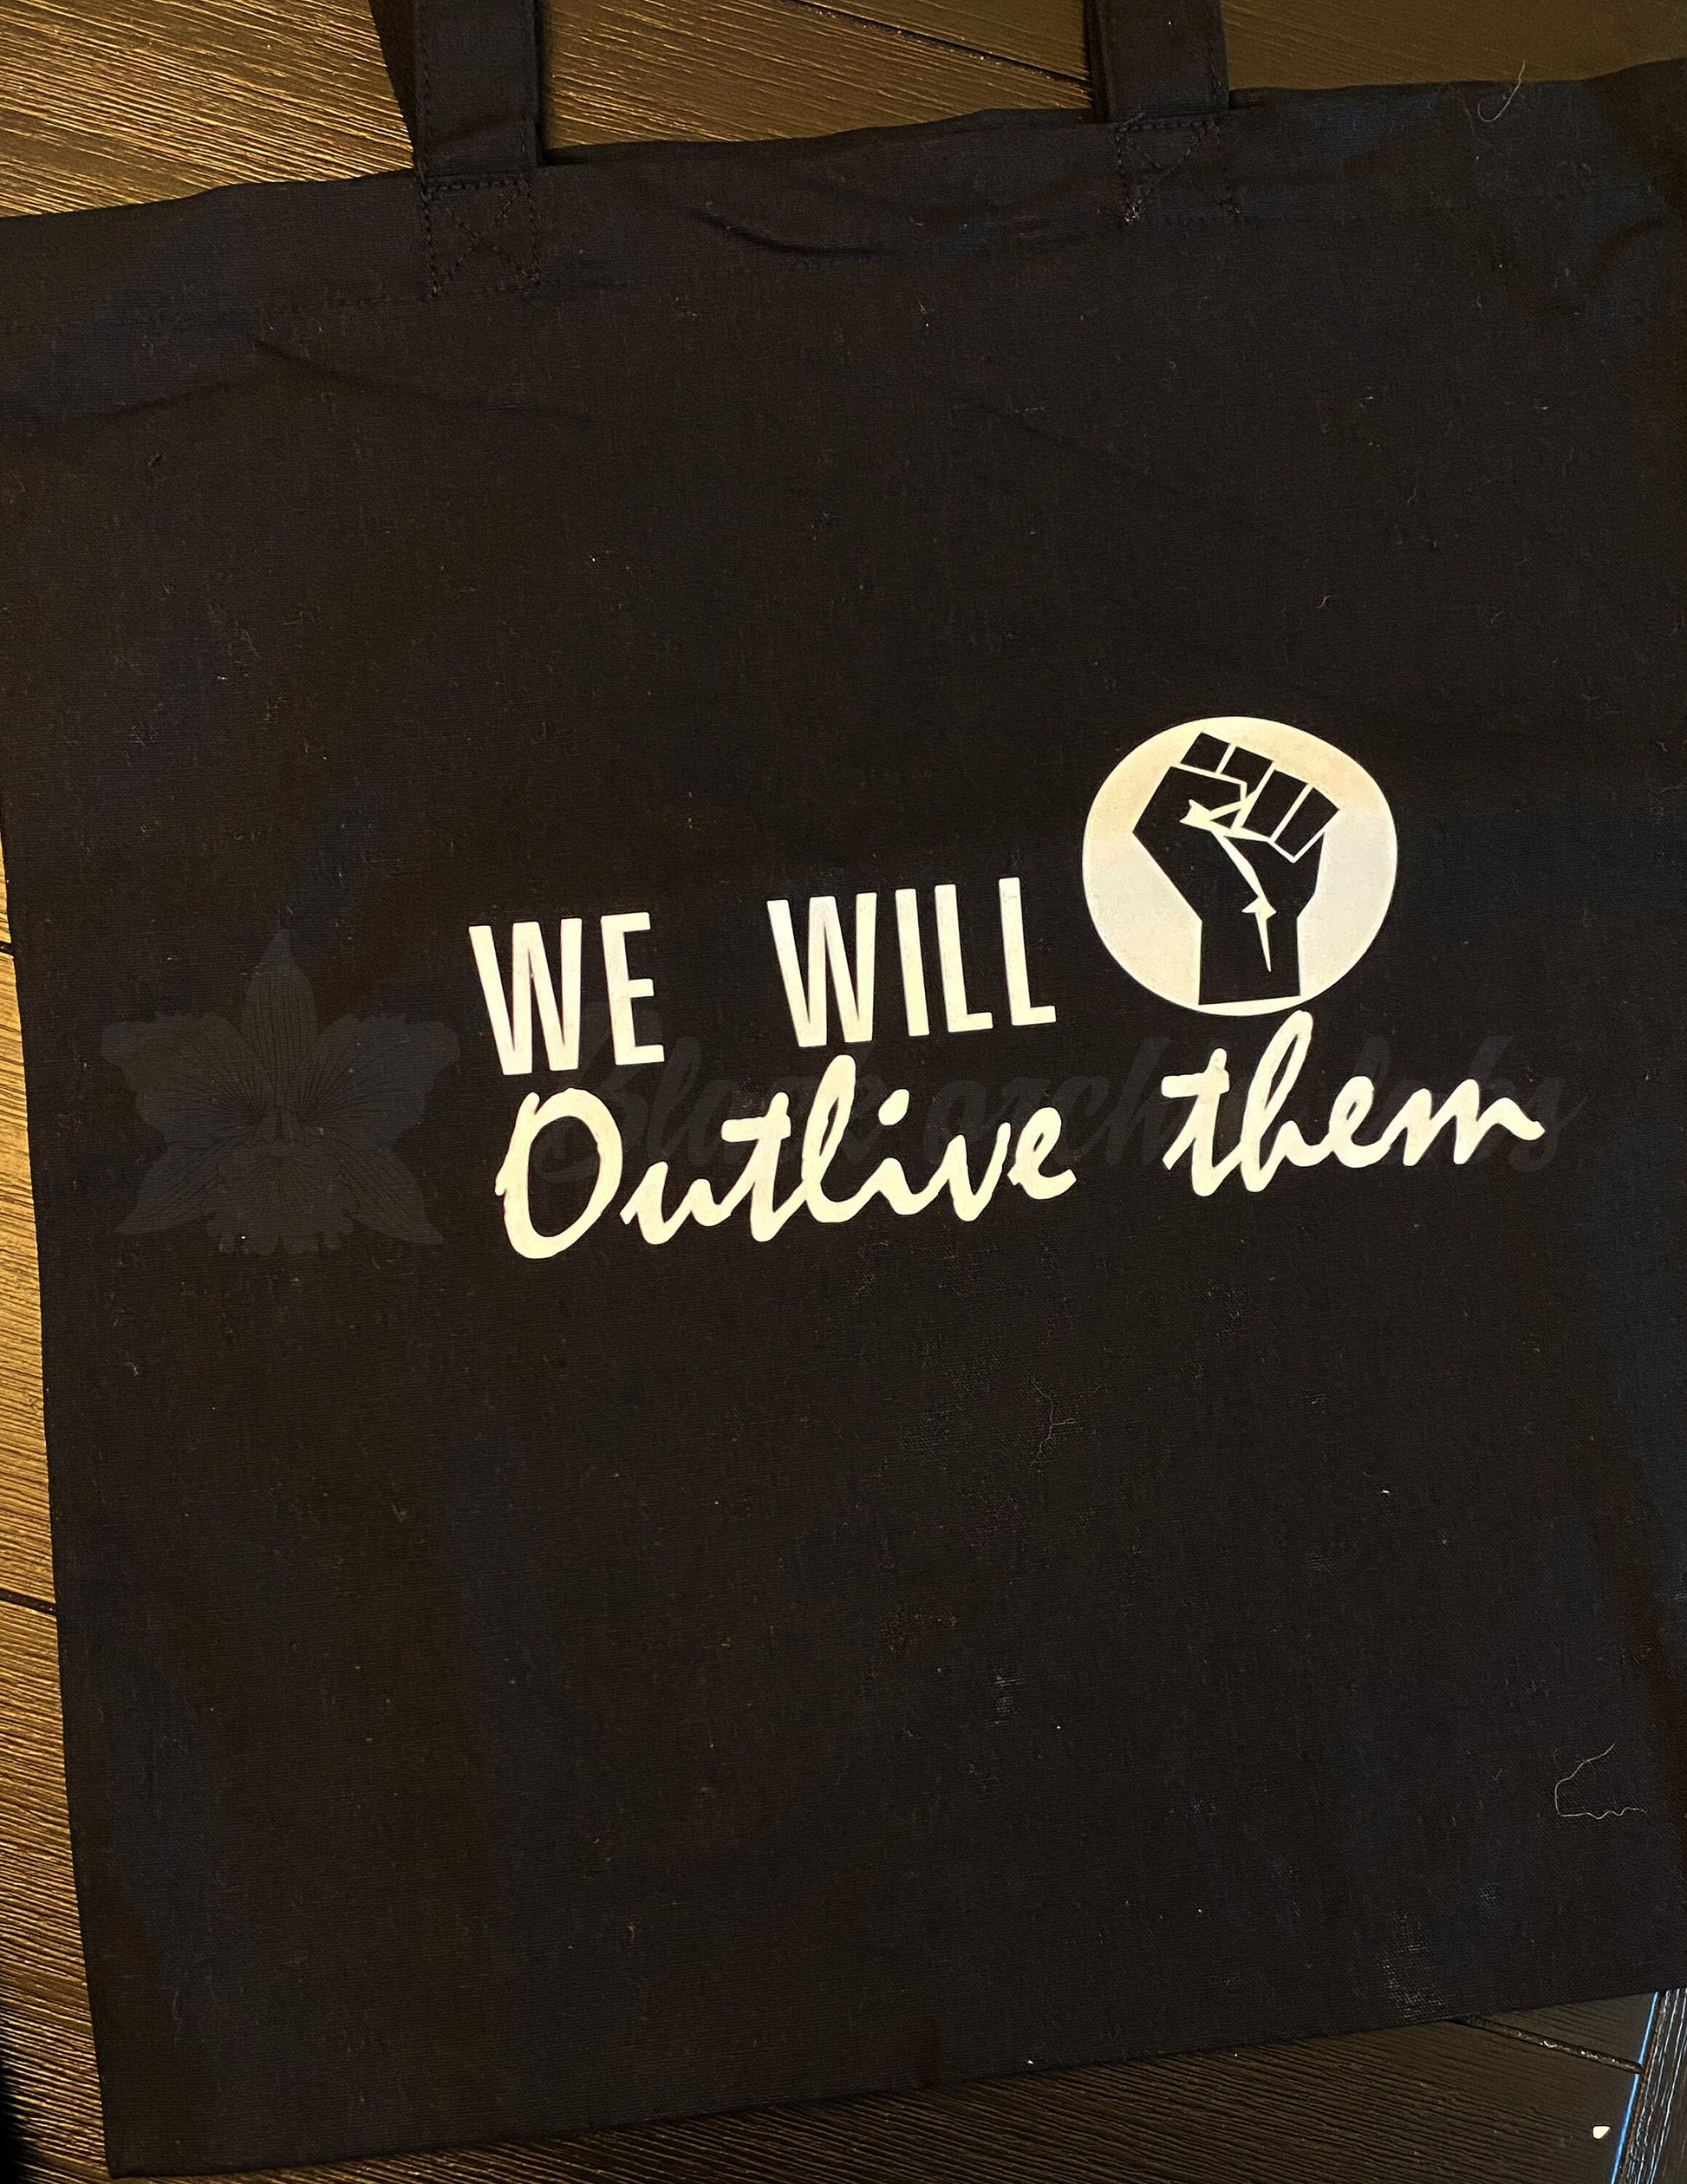 We Will Outlive Them Tote, T-shirt, Hoodie, or Tank, Empowerment, March Shirt, Protest Shirt, Positive Message, Survivor Shirt, Anti-Racist